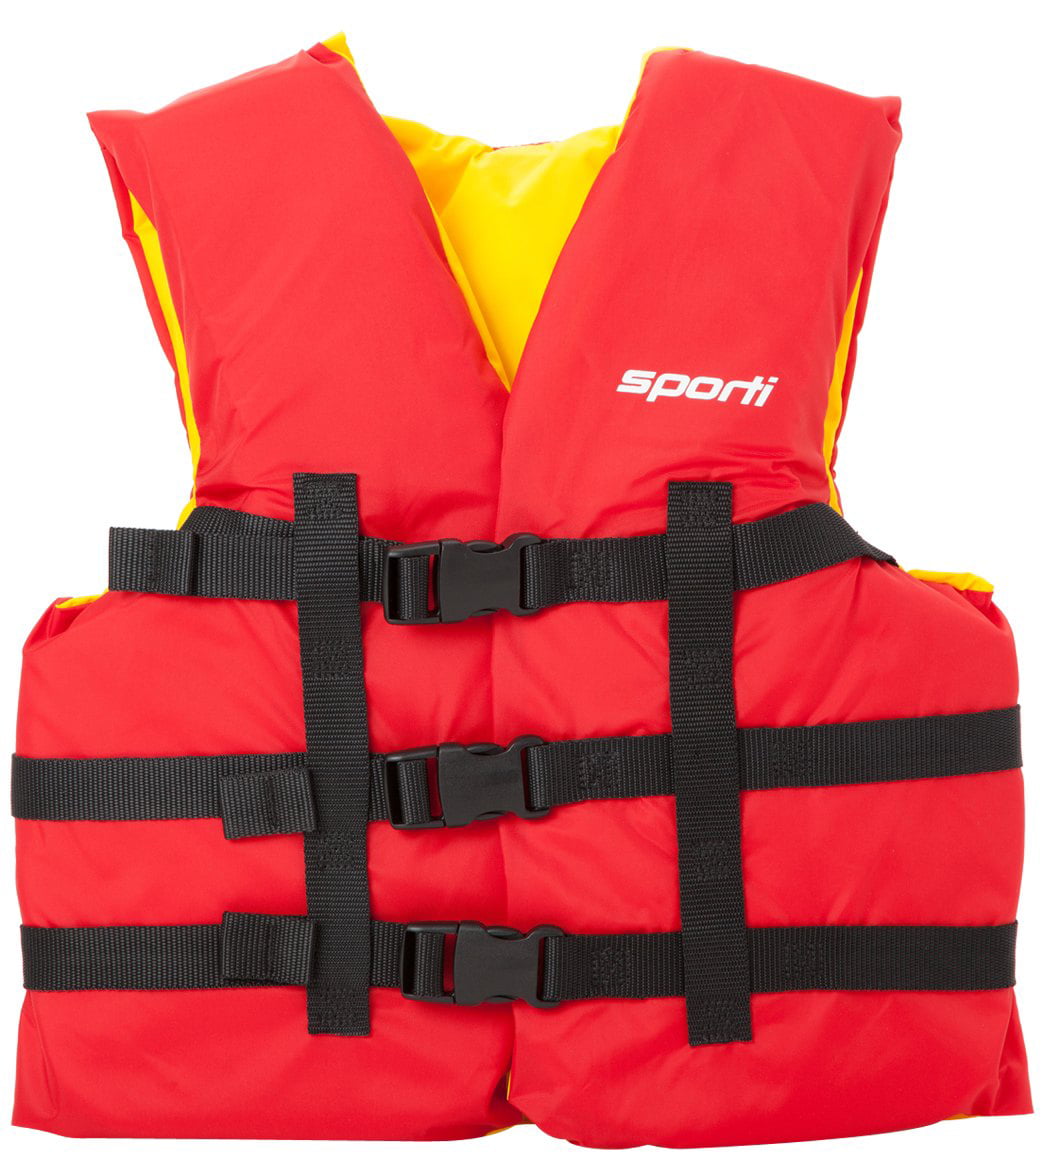 Stearns Life Vest Chest Size 26"-29" Youth Med 50-90 Lbs USCG New! 